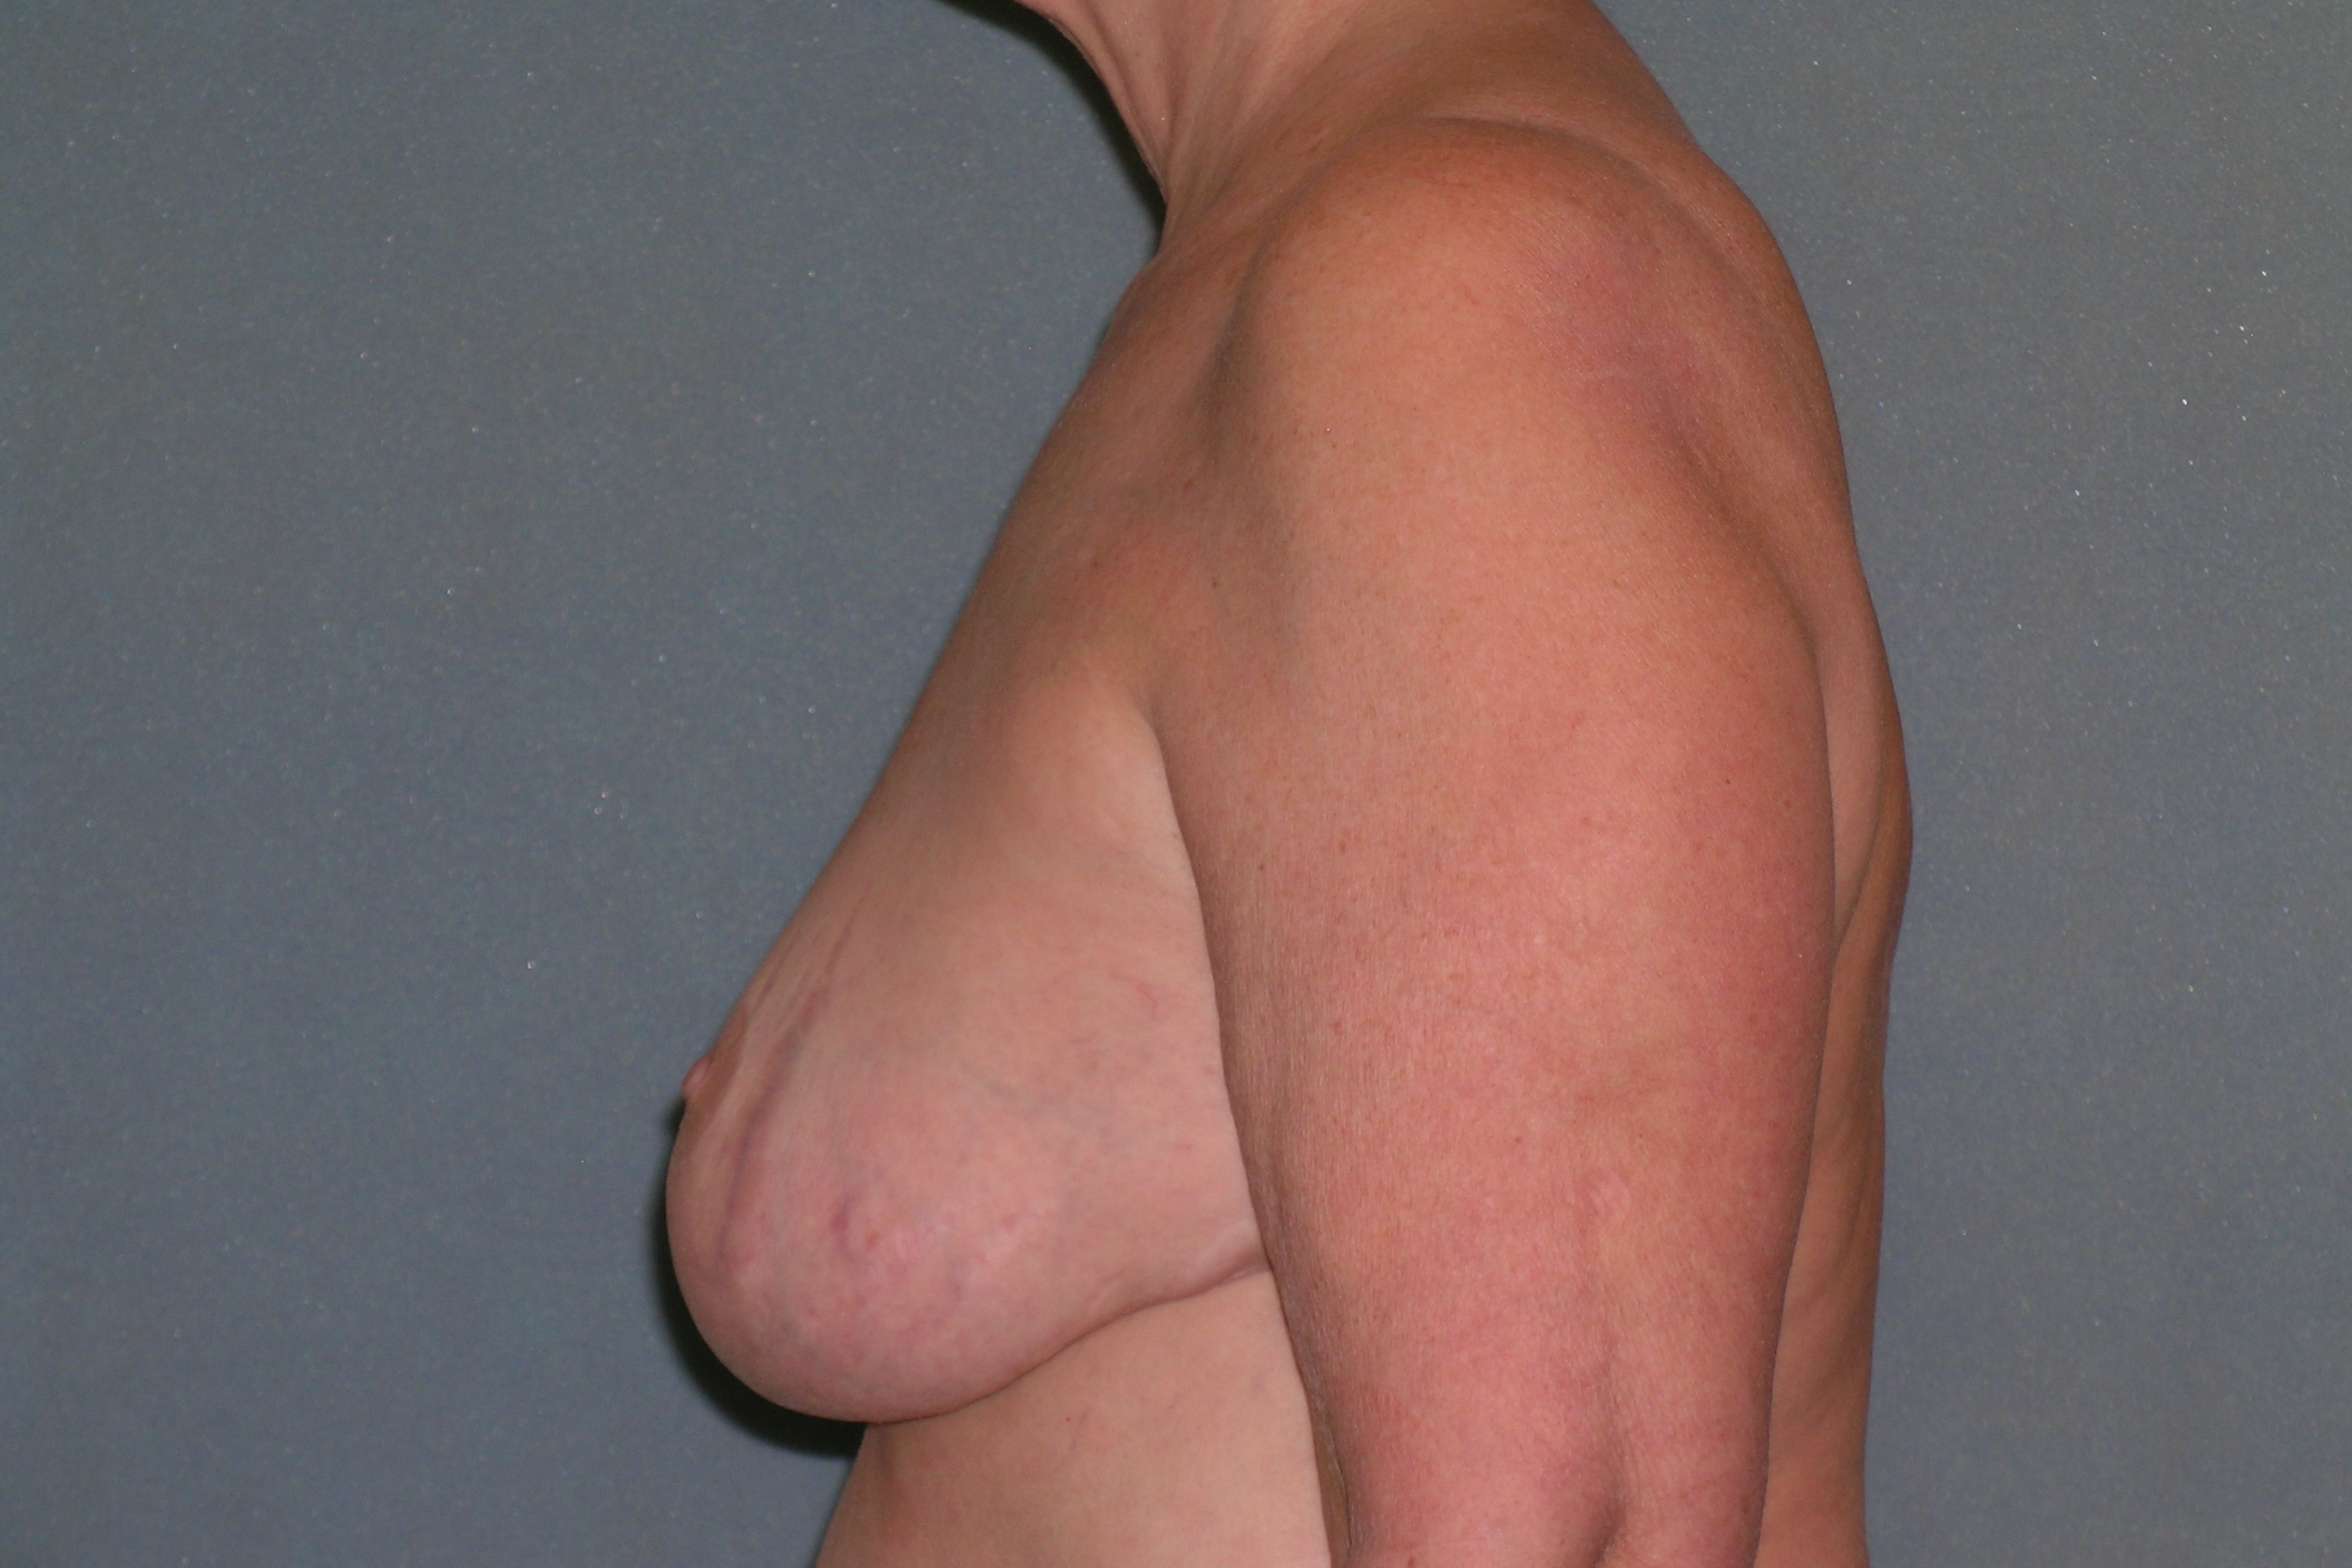 Breast Reconstruction Before and After Photos